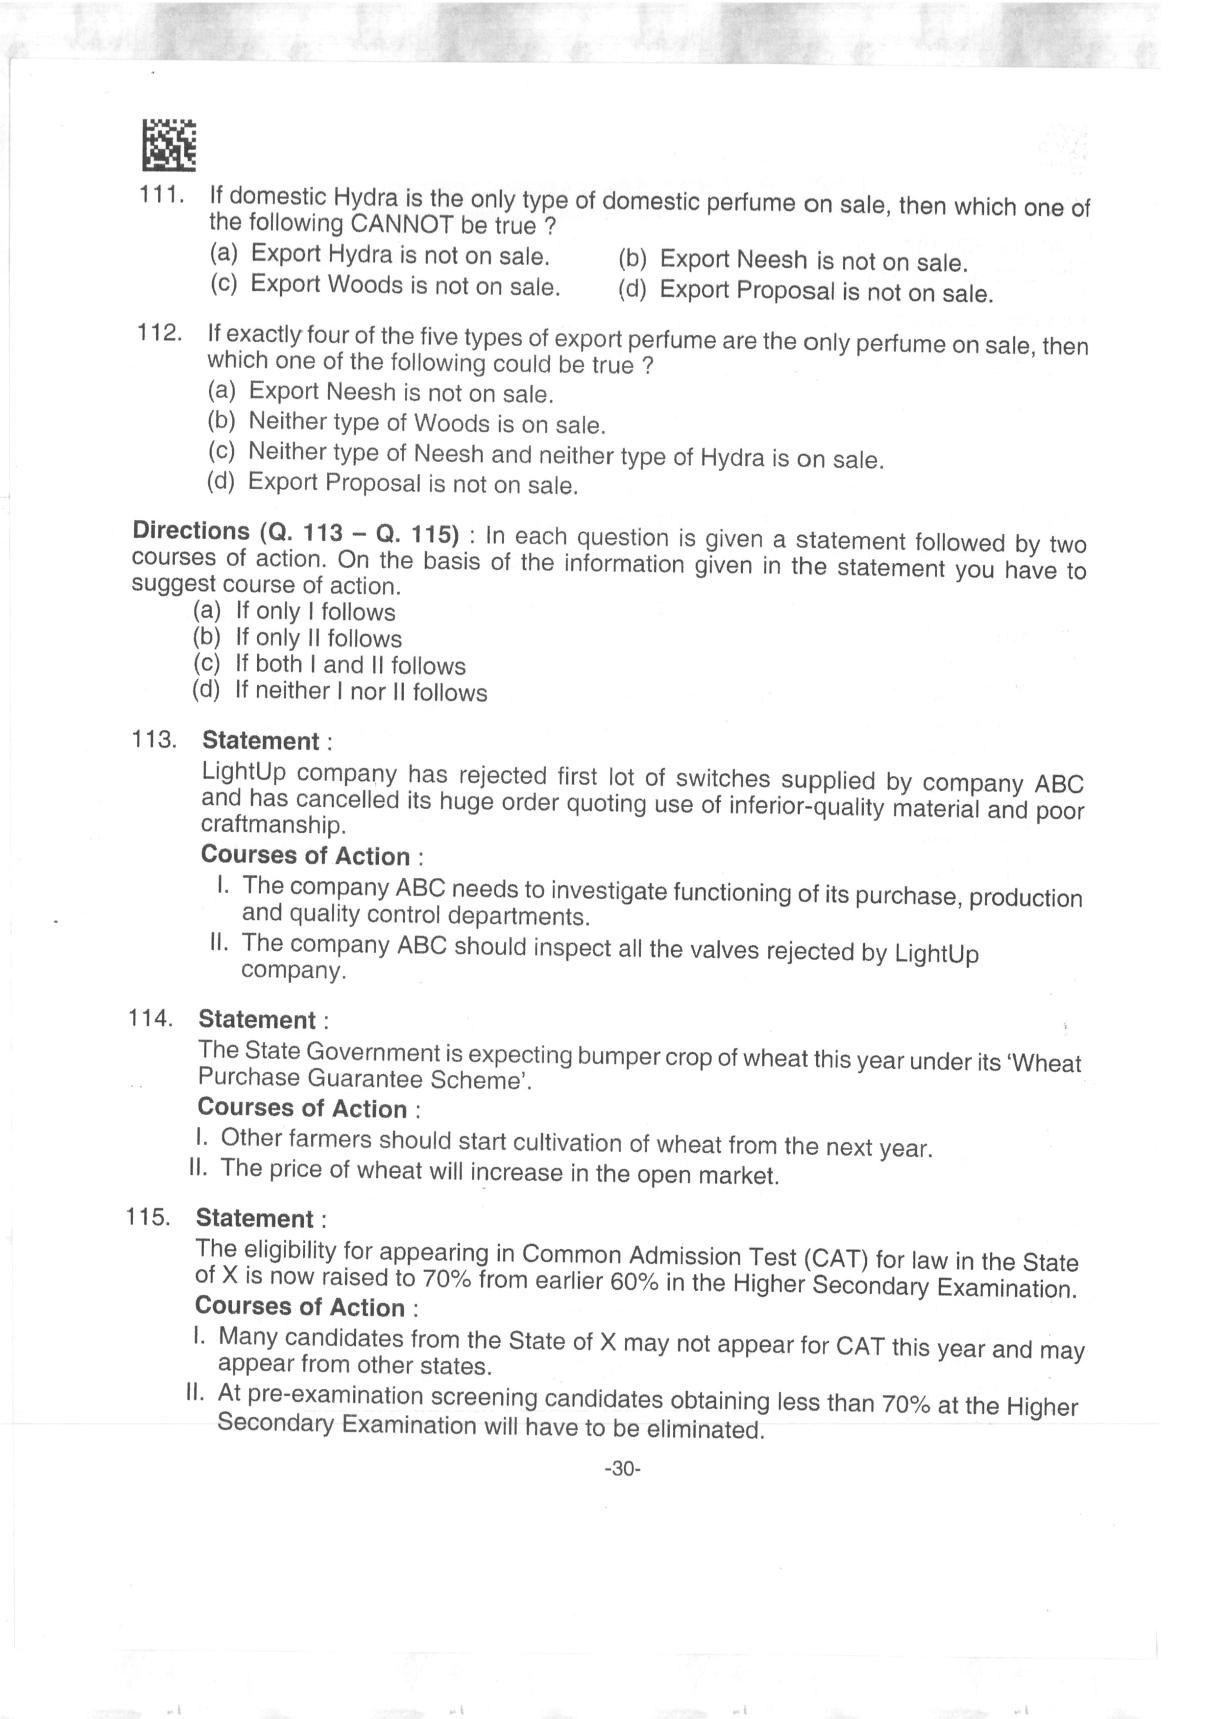 AILET 2019 Question Paper for BA LLB - Page 30